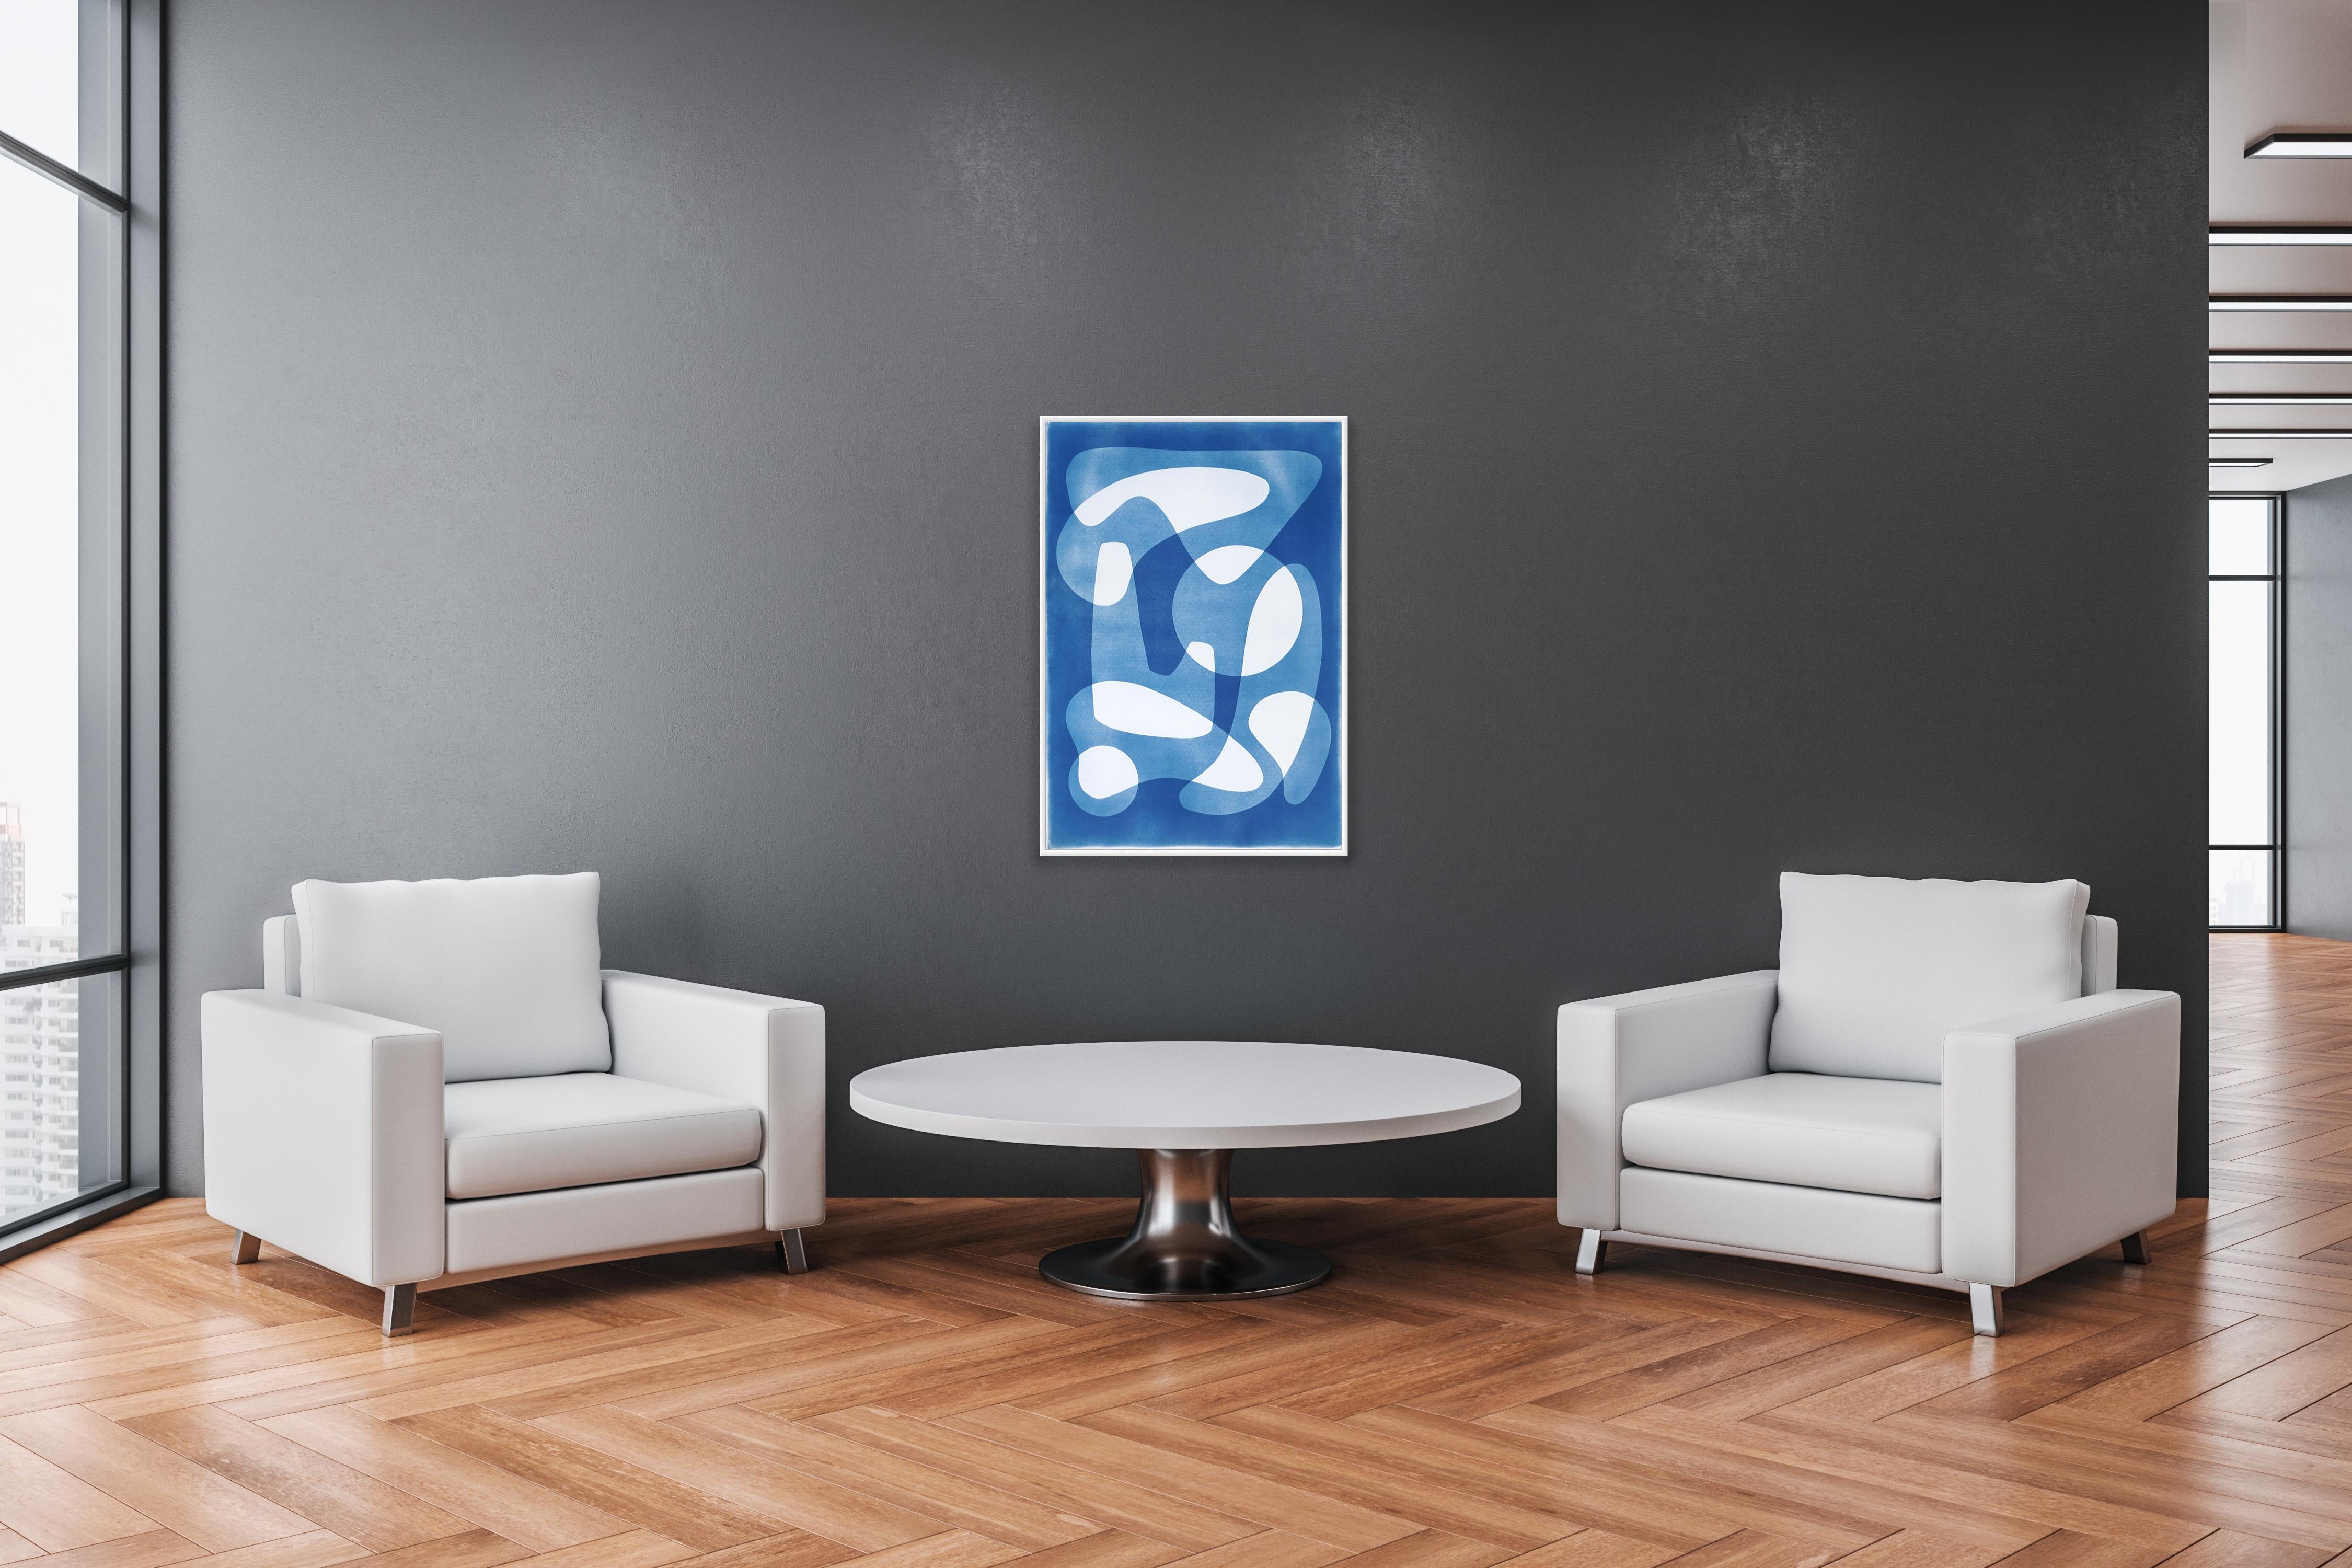 This is an exclusive handprinted unique cyanotype that takes its inspiration from the mid-century modern shapes.
It's made by layering paper cutouts and different exposures using uv-light. 

Details:
+ Title: Mid-Century Shapes IX
+ Year: 2024
+